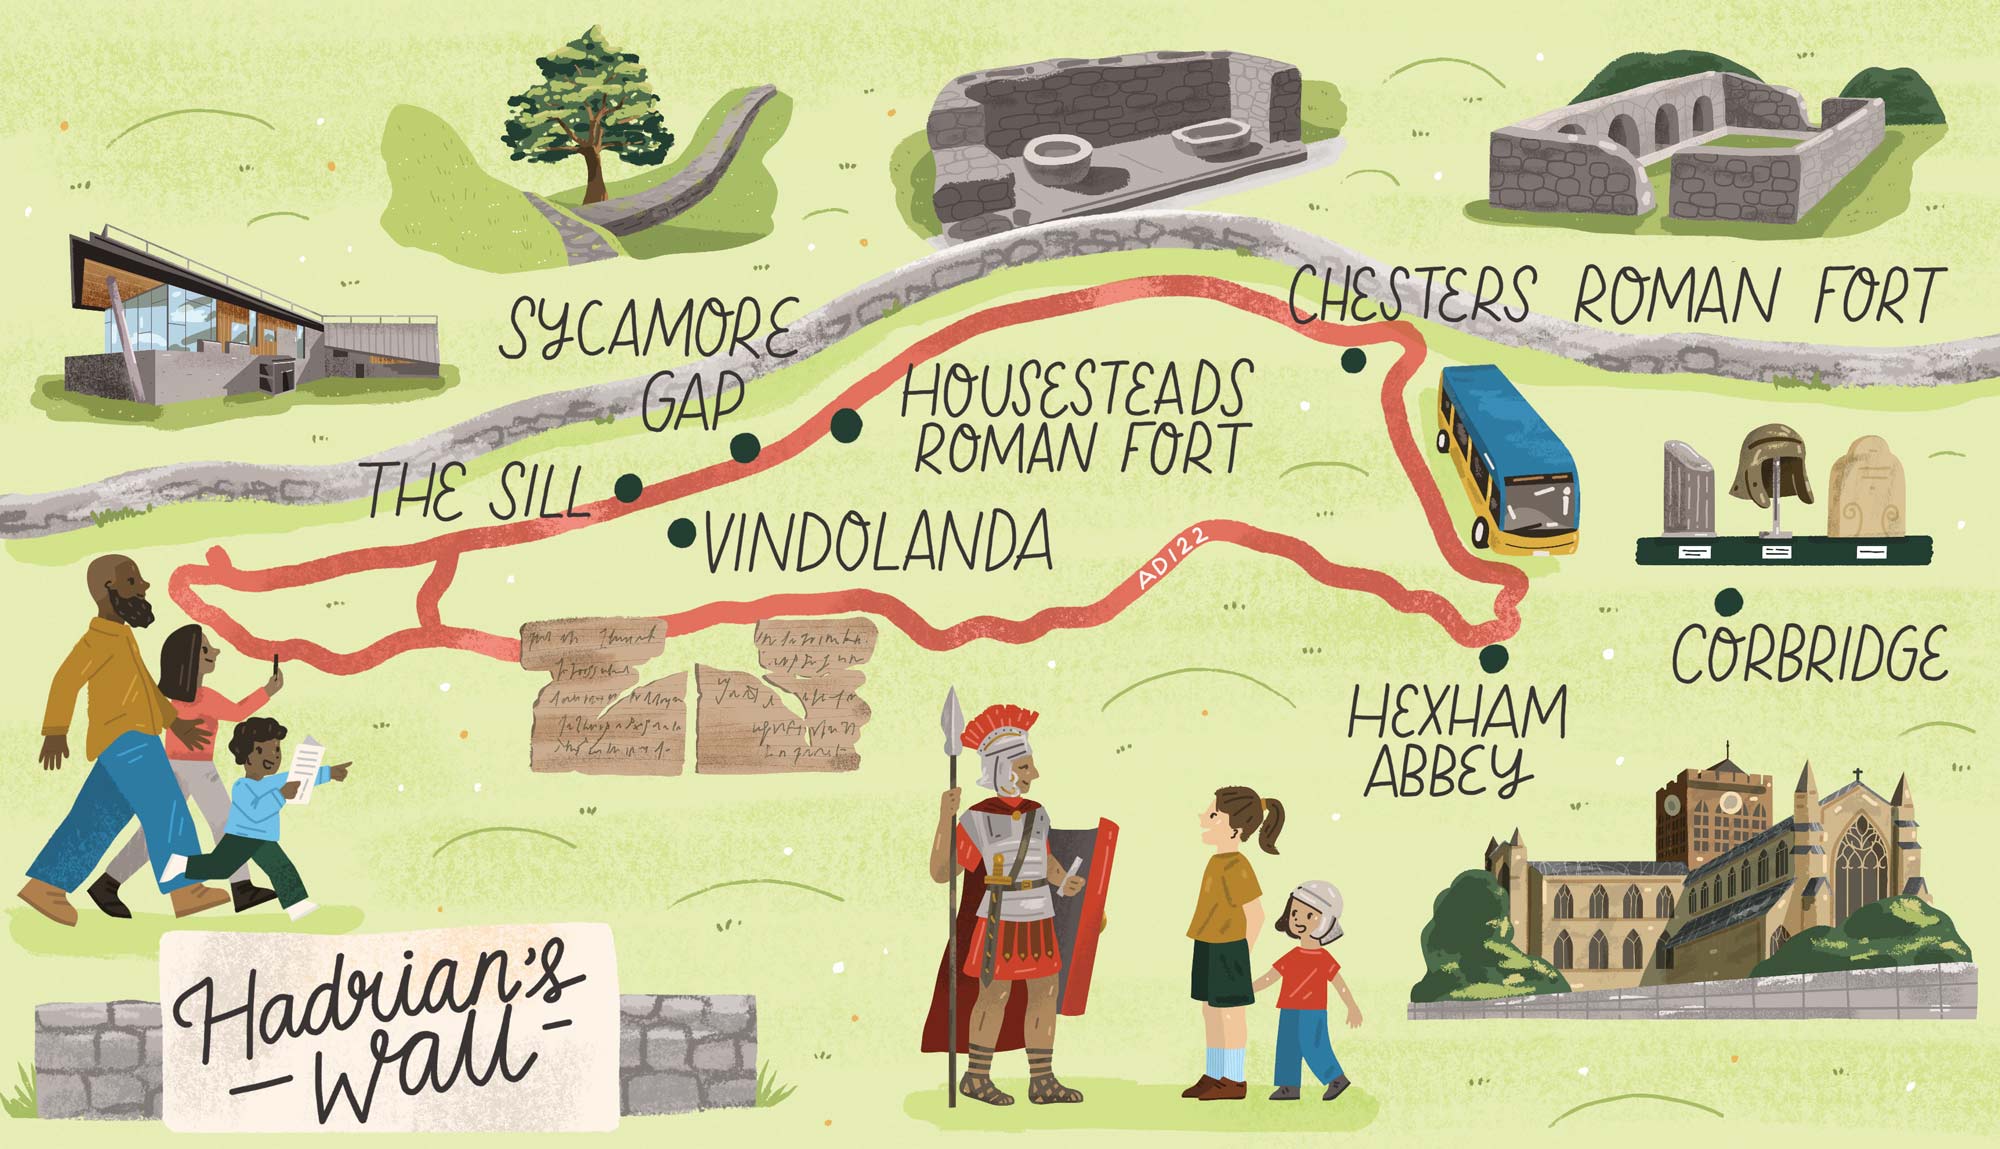 Map of Hadrian's Wall for Discover Britain Magazine by Elly Jahnz